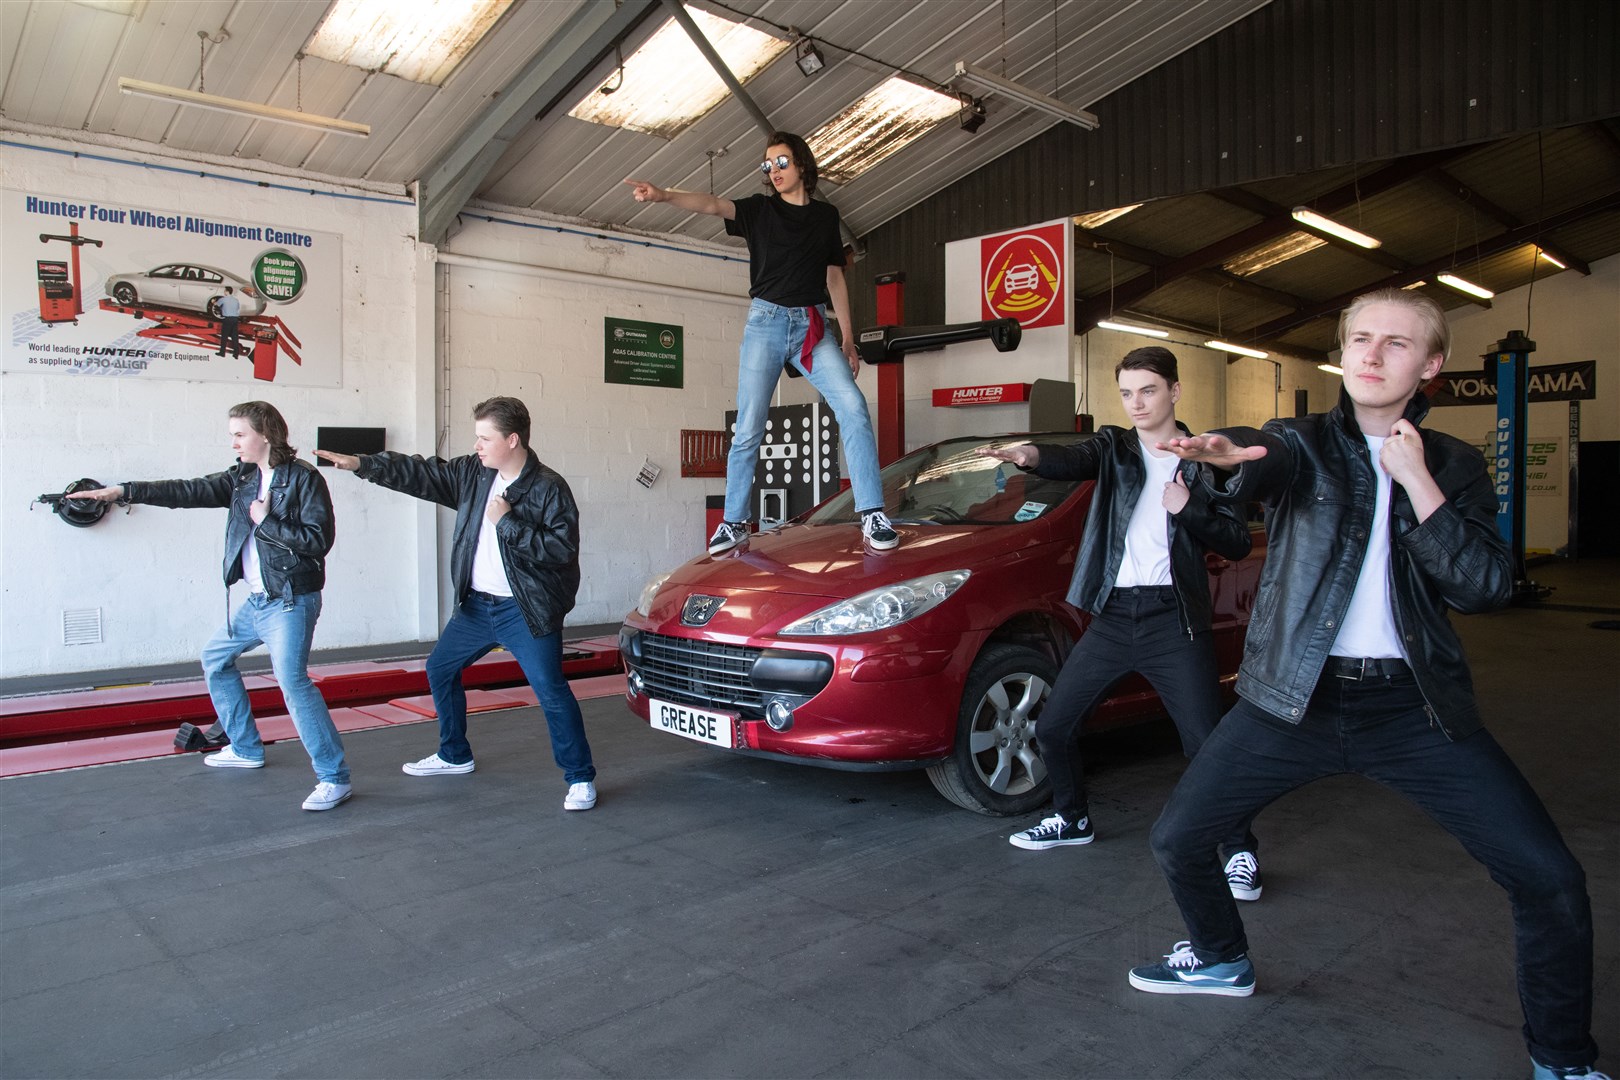 The seniors performed Greased Lightnin' in the GT Tyres garage ahead of their show. Picture: Daniel Forsyth